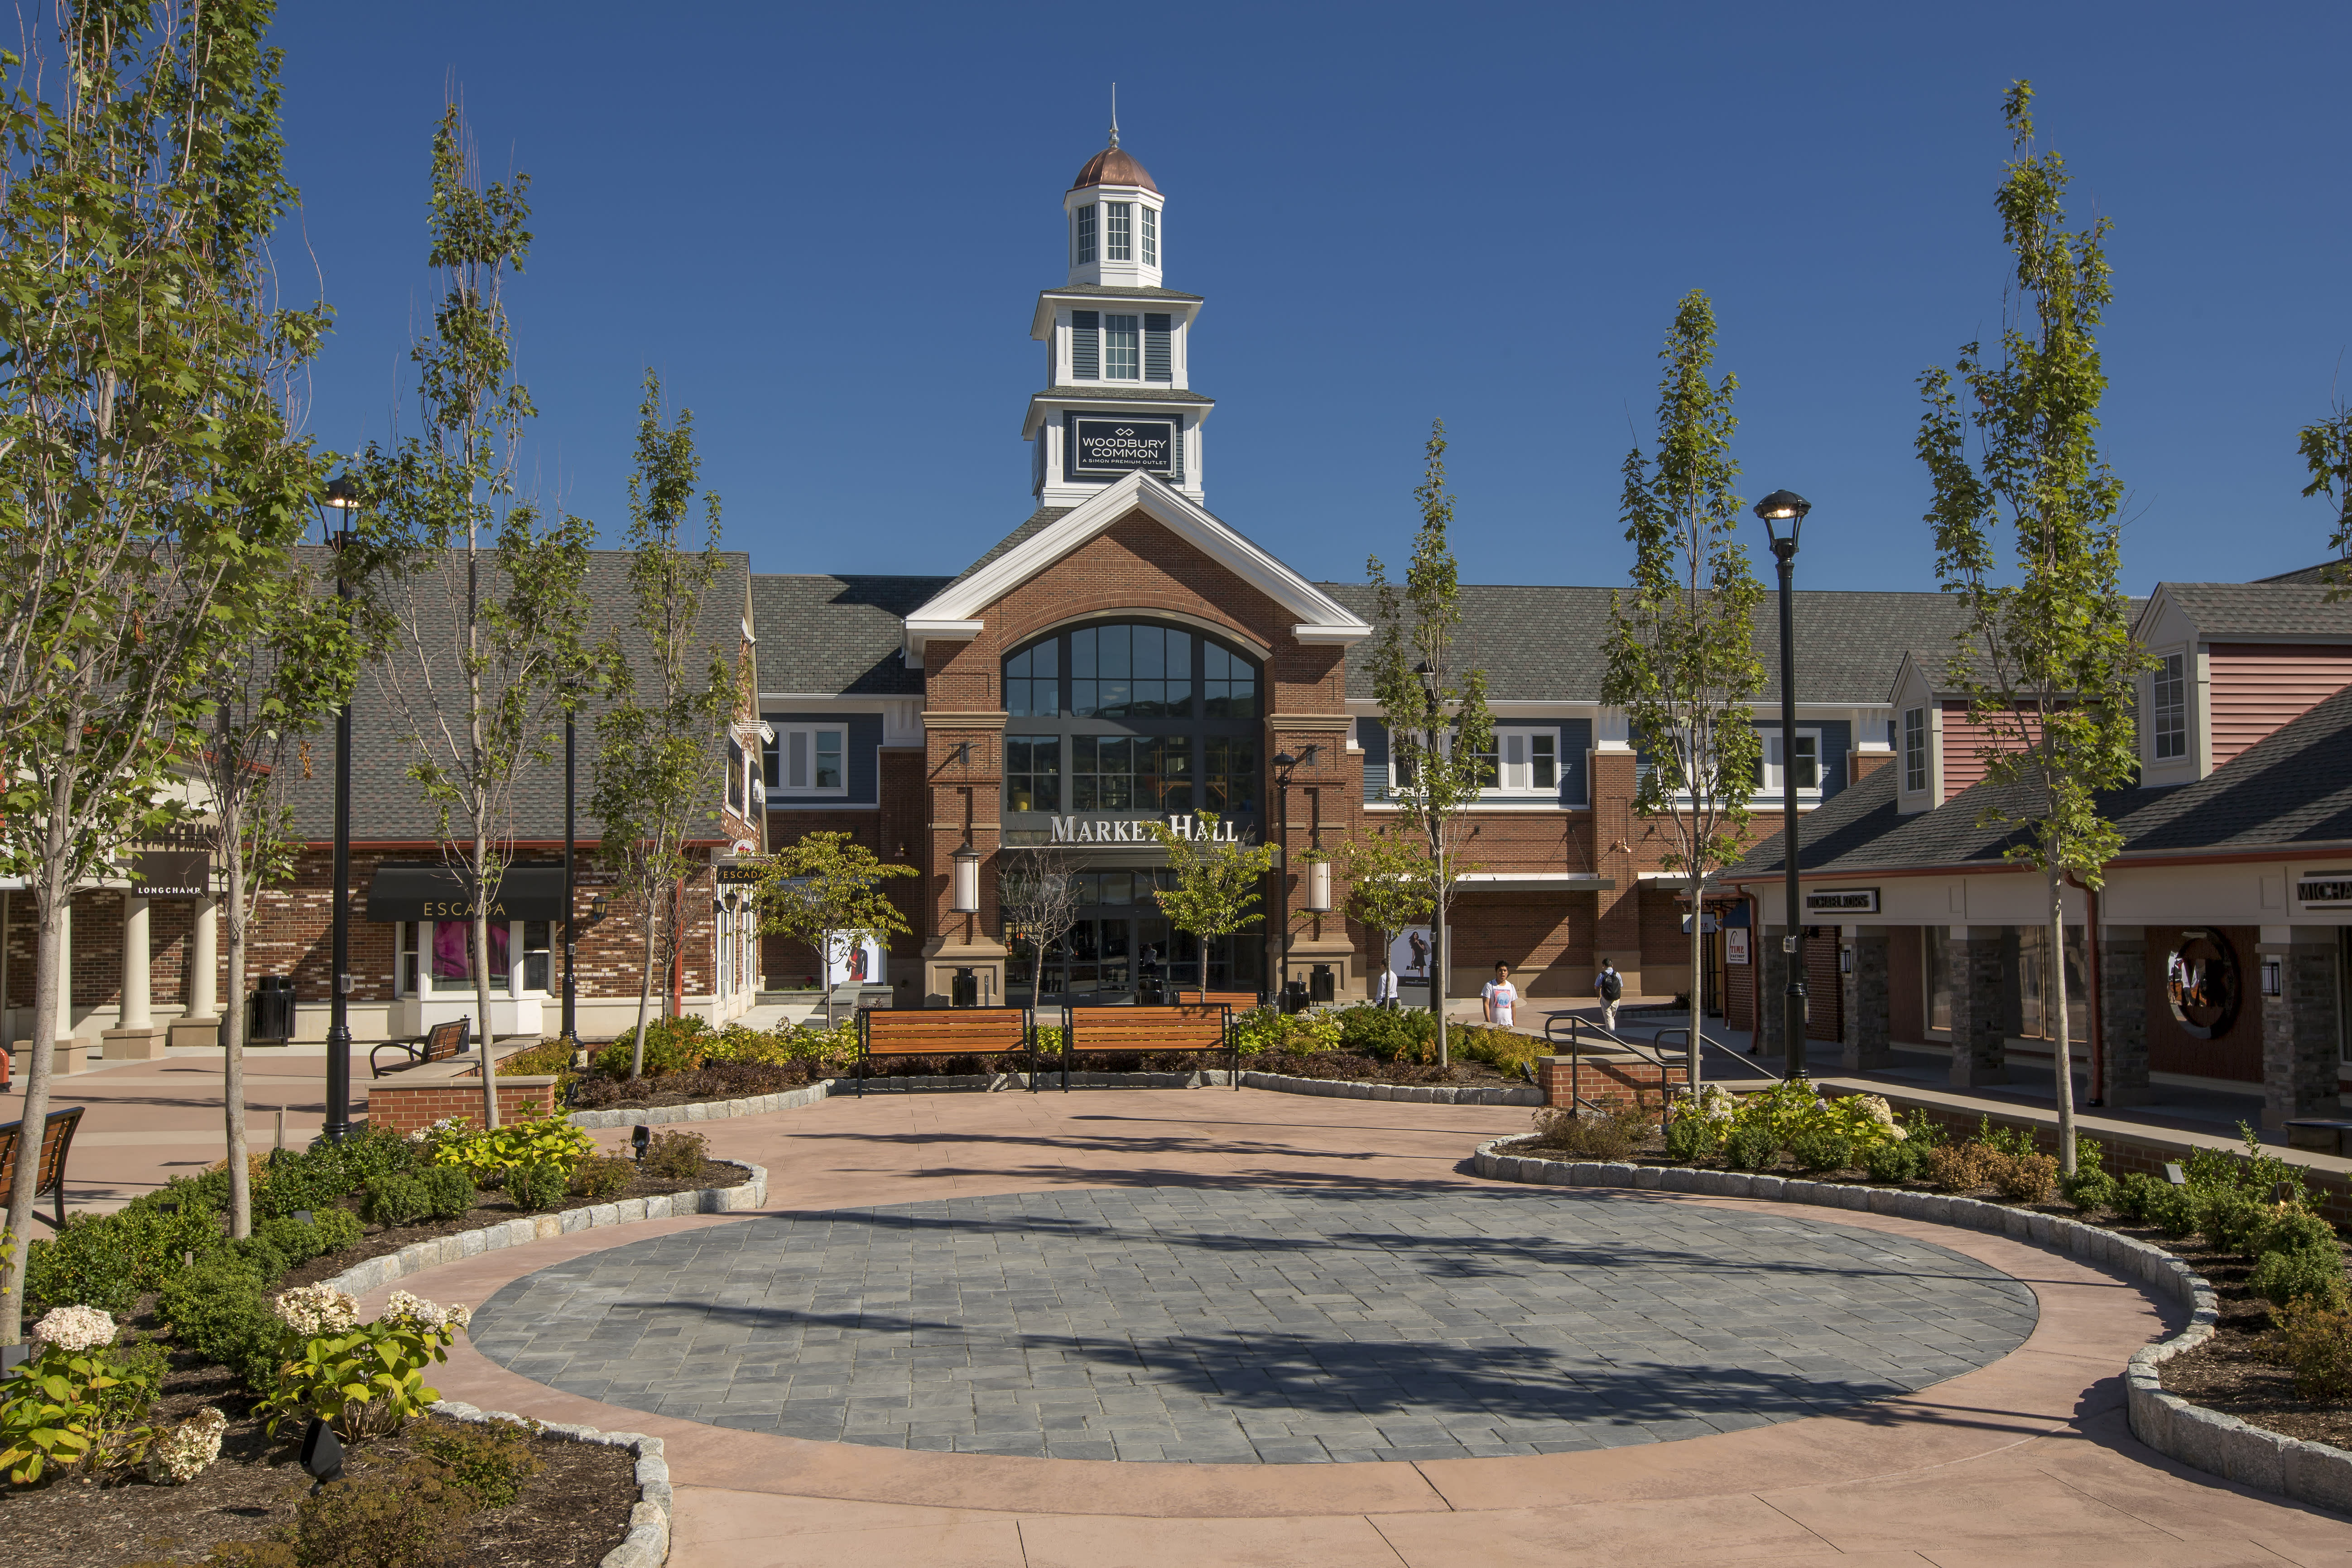 Leasing & Advertising at Woodbury Common Premium Outlets®, a SIMON Center